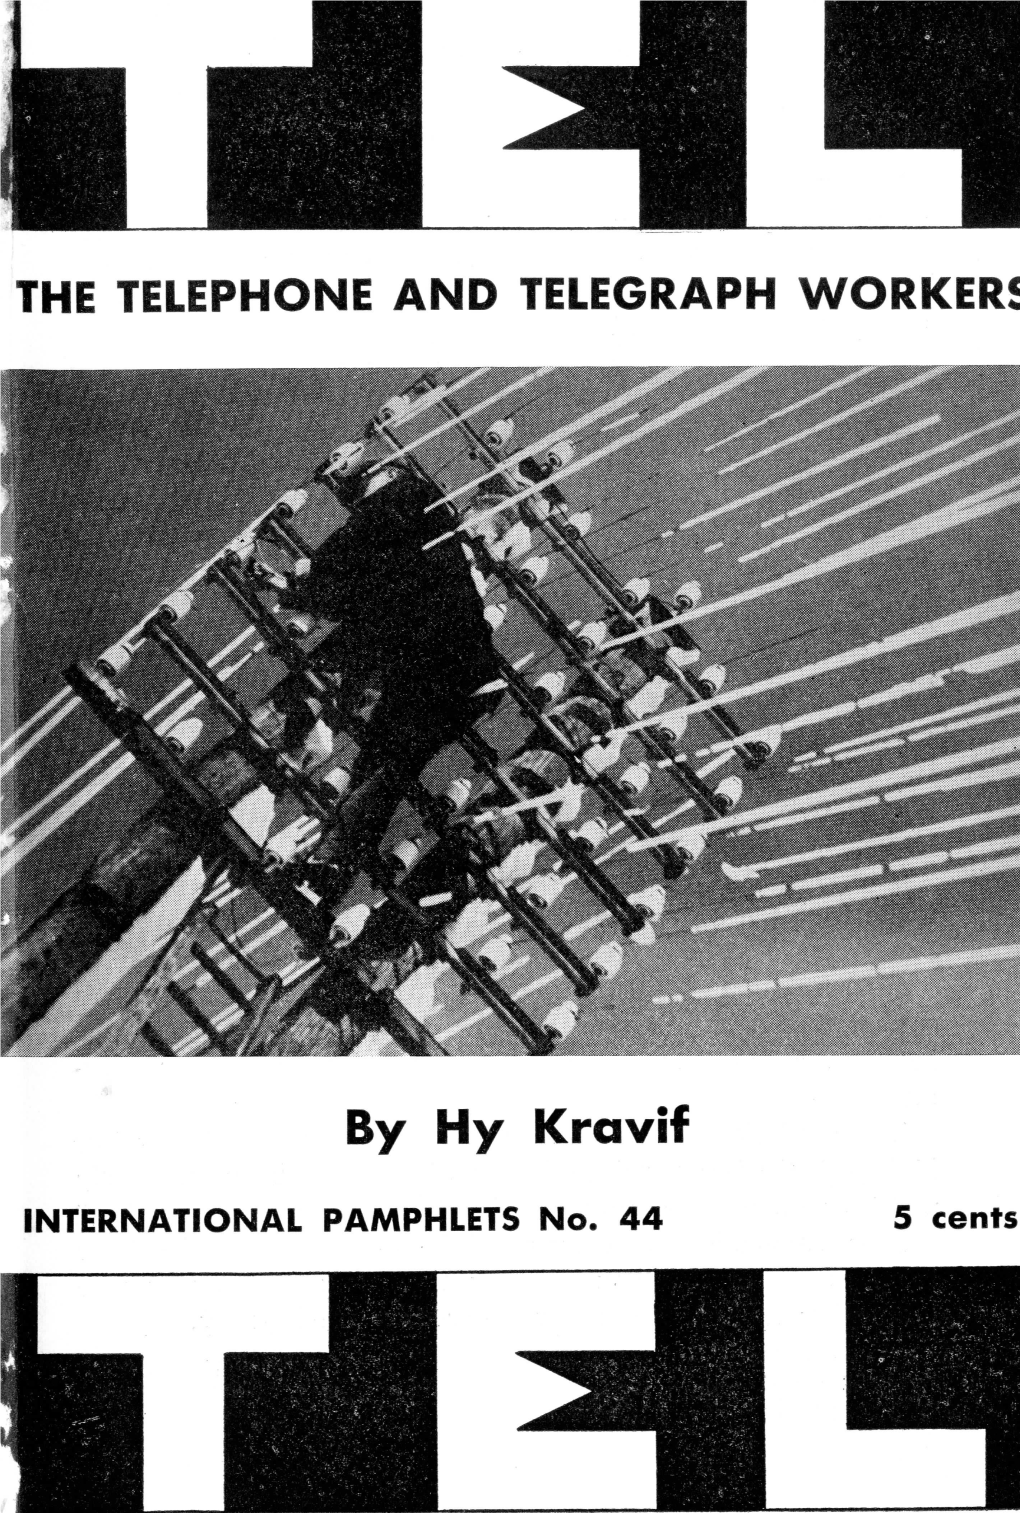 THE TELEPHONE and TELEGRAPH WORKER! by Hy Kravif